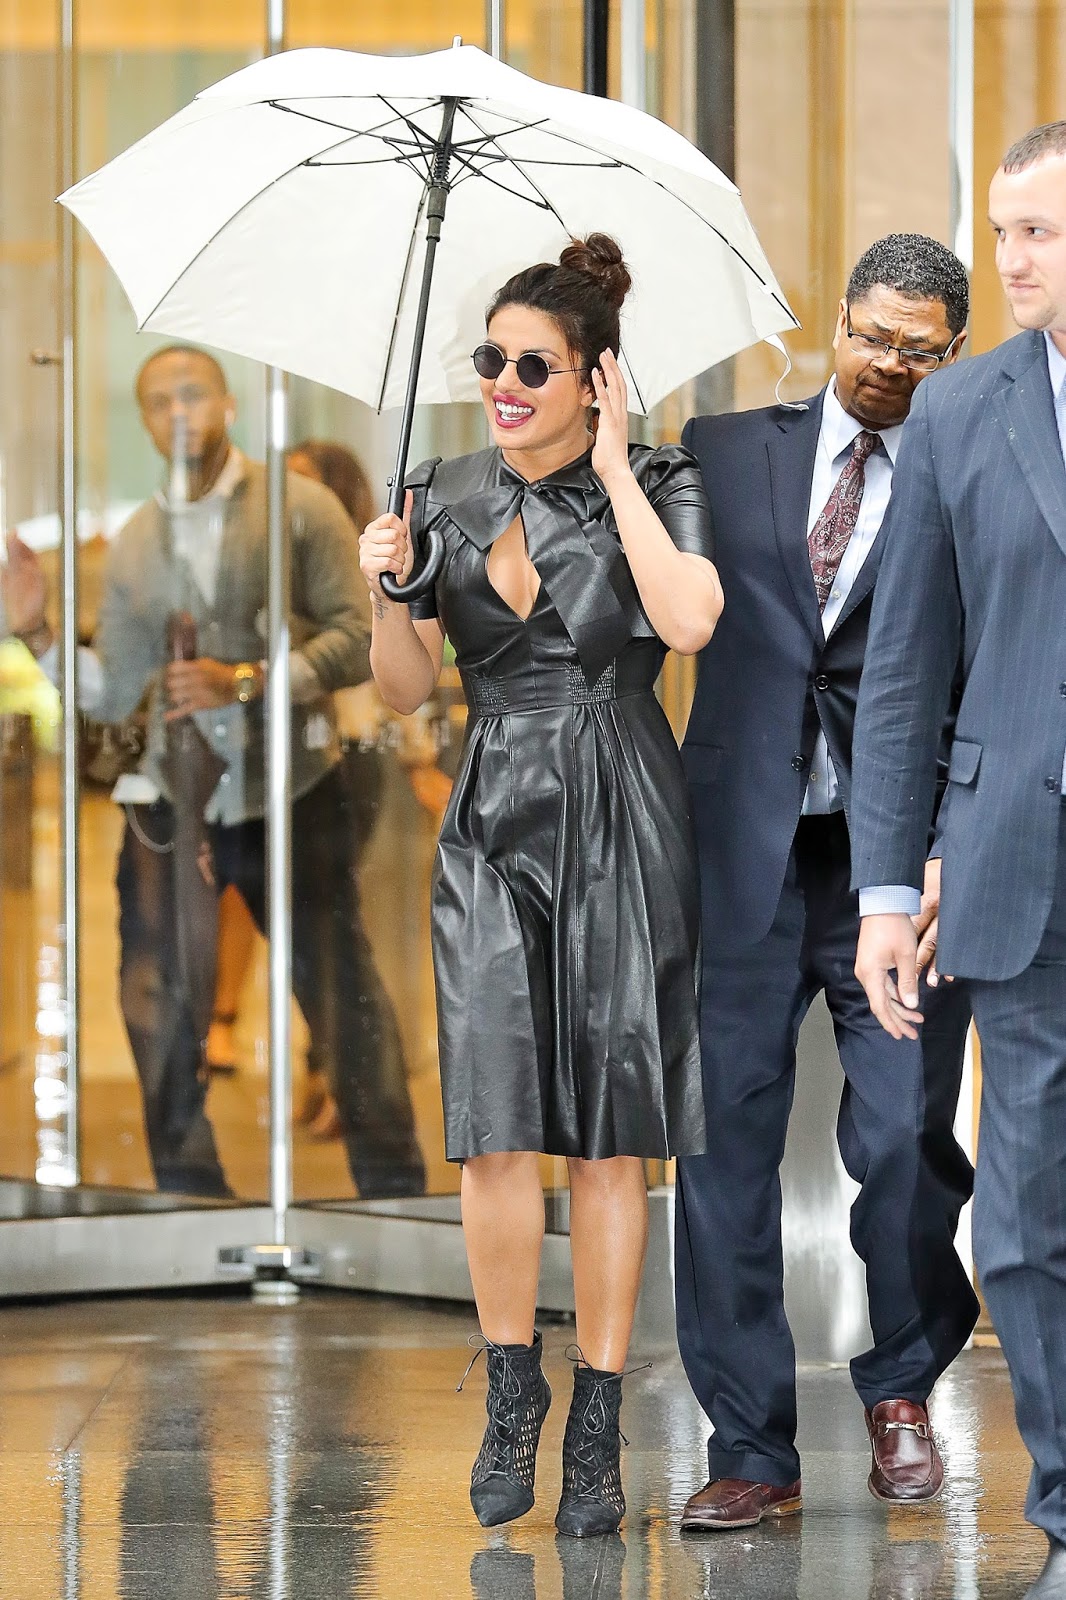 Priyanka Chopra Displayed Her Sexy Cleavage in a Black Leather Dress as She Was Out on a Rainy Day in New York City